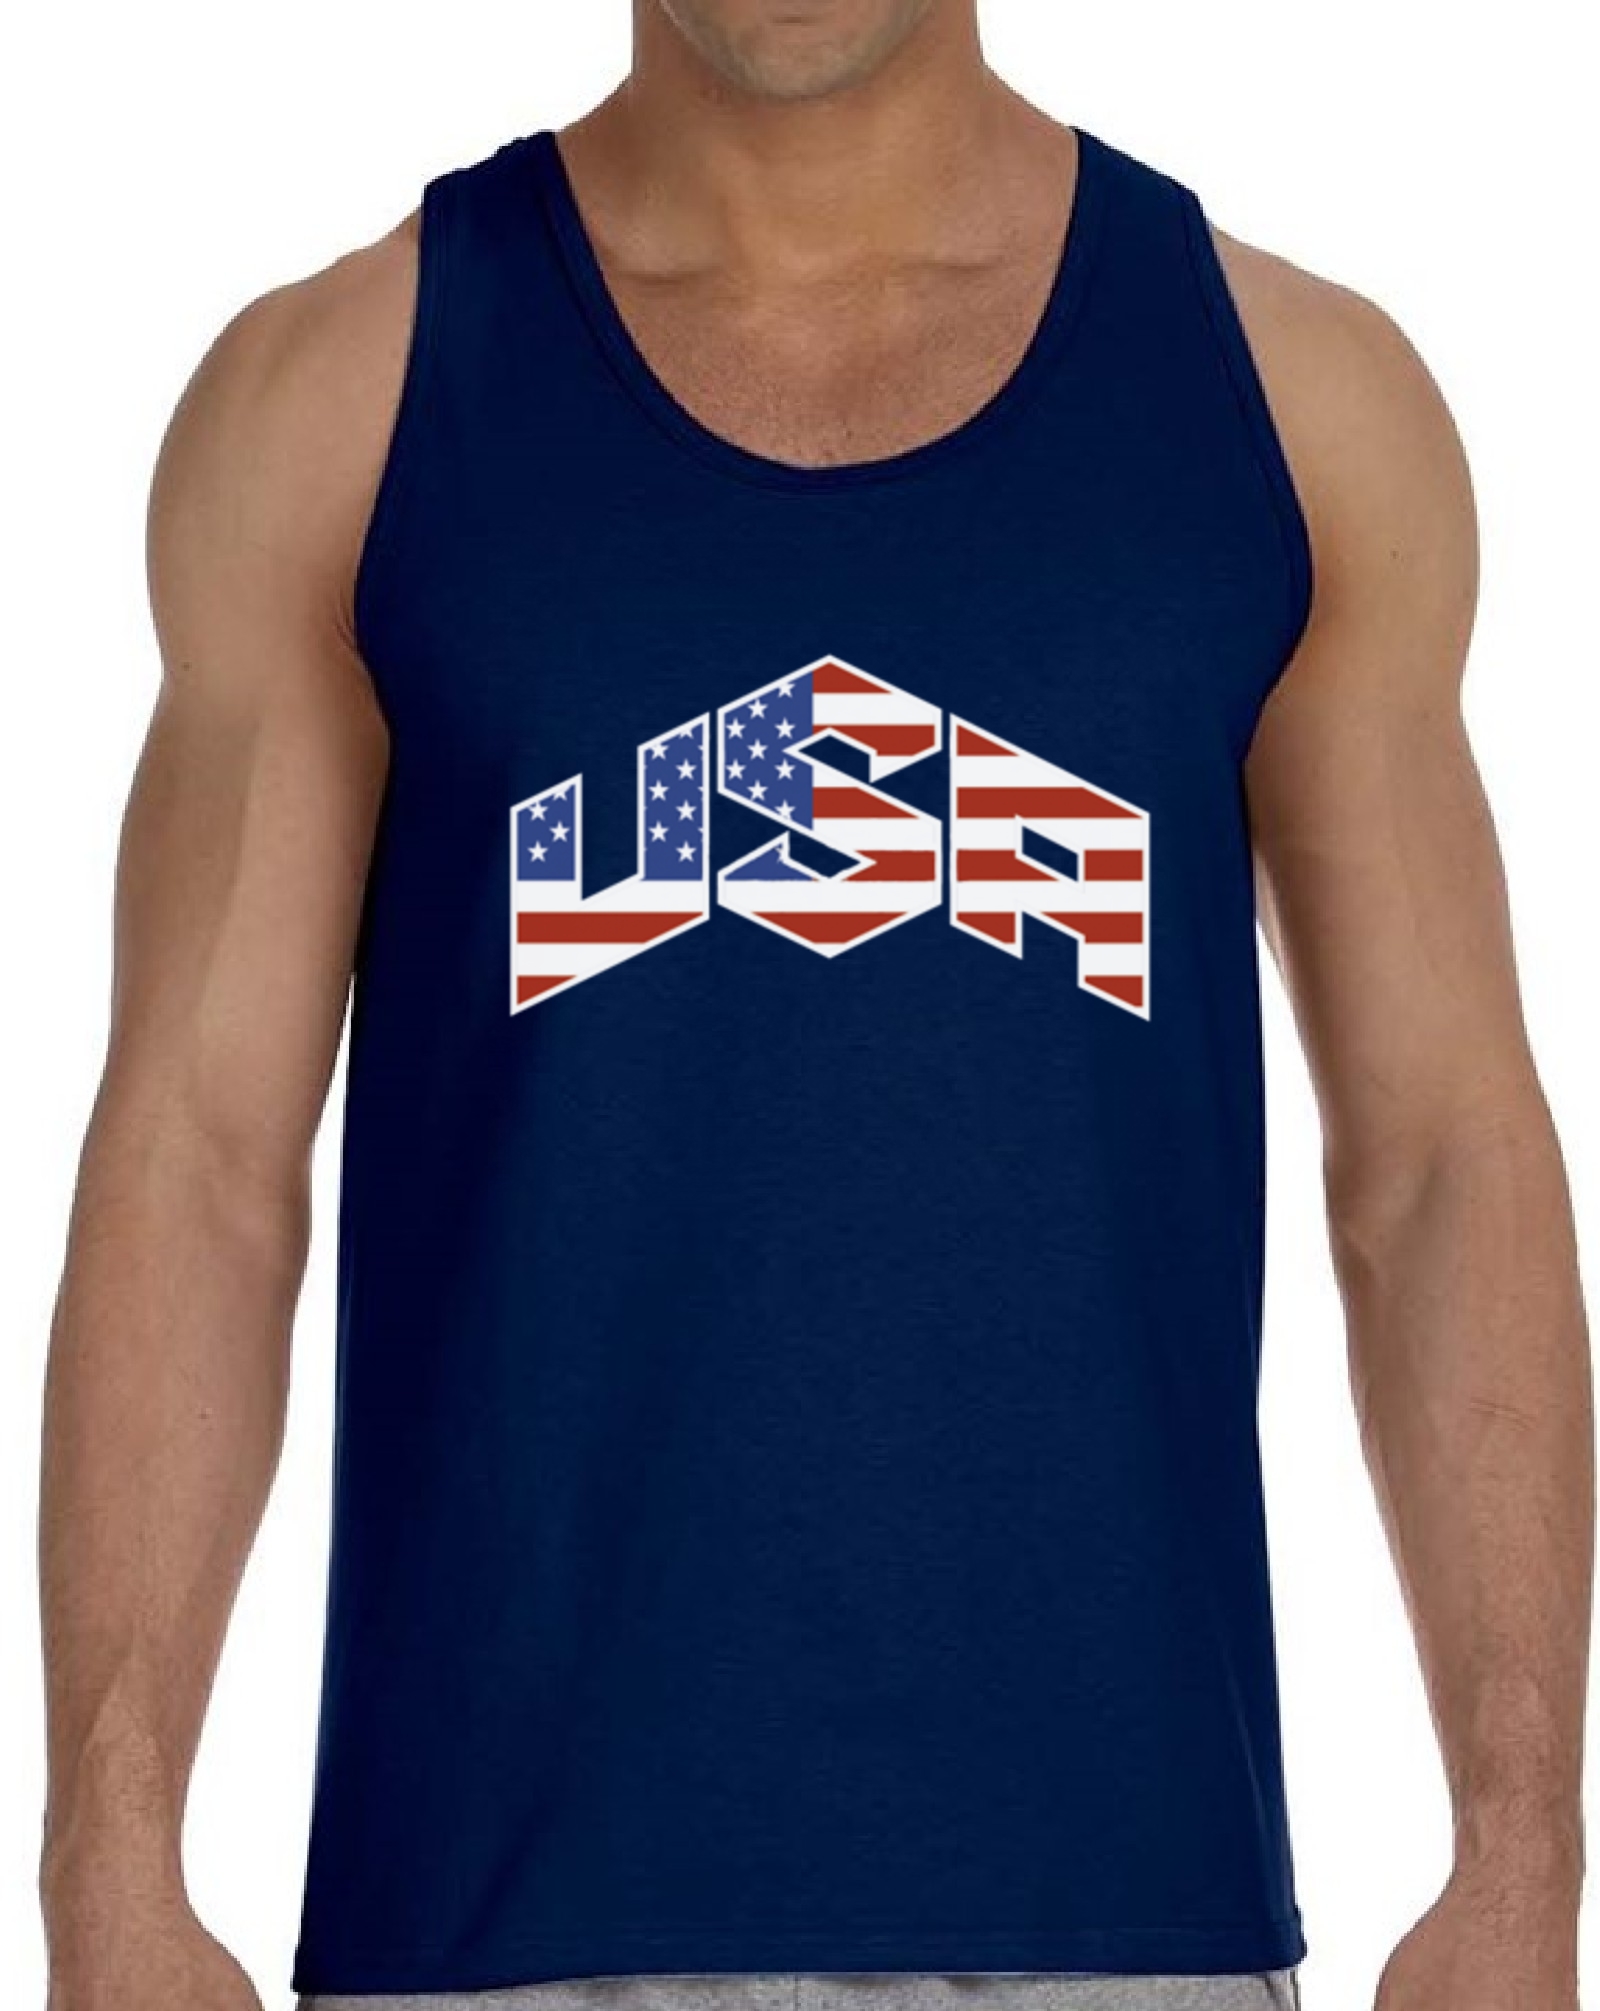 USA Flag Inside Men's Tank Top 4th of July Fourth of July USA | eBay